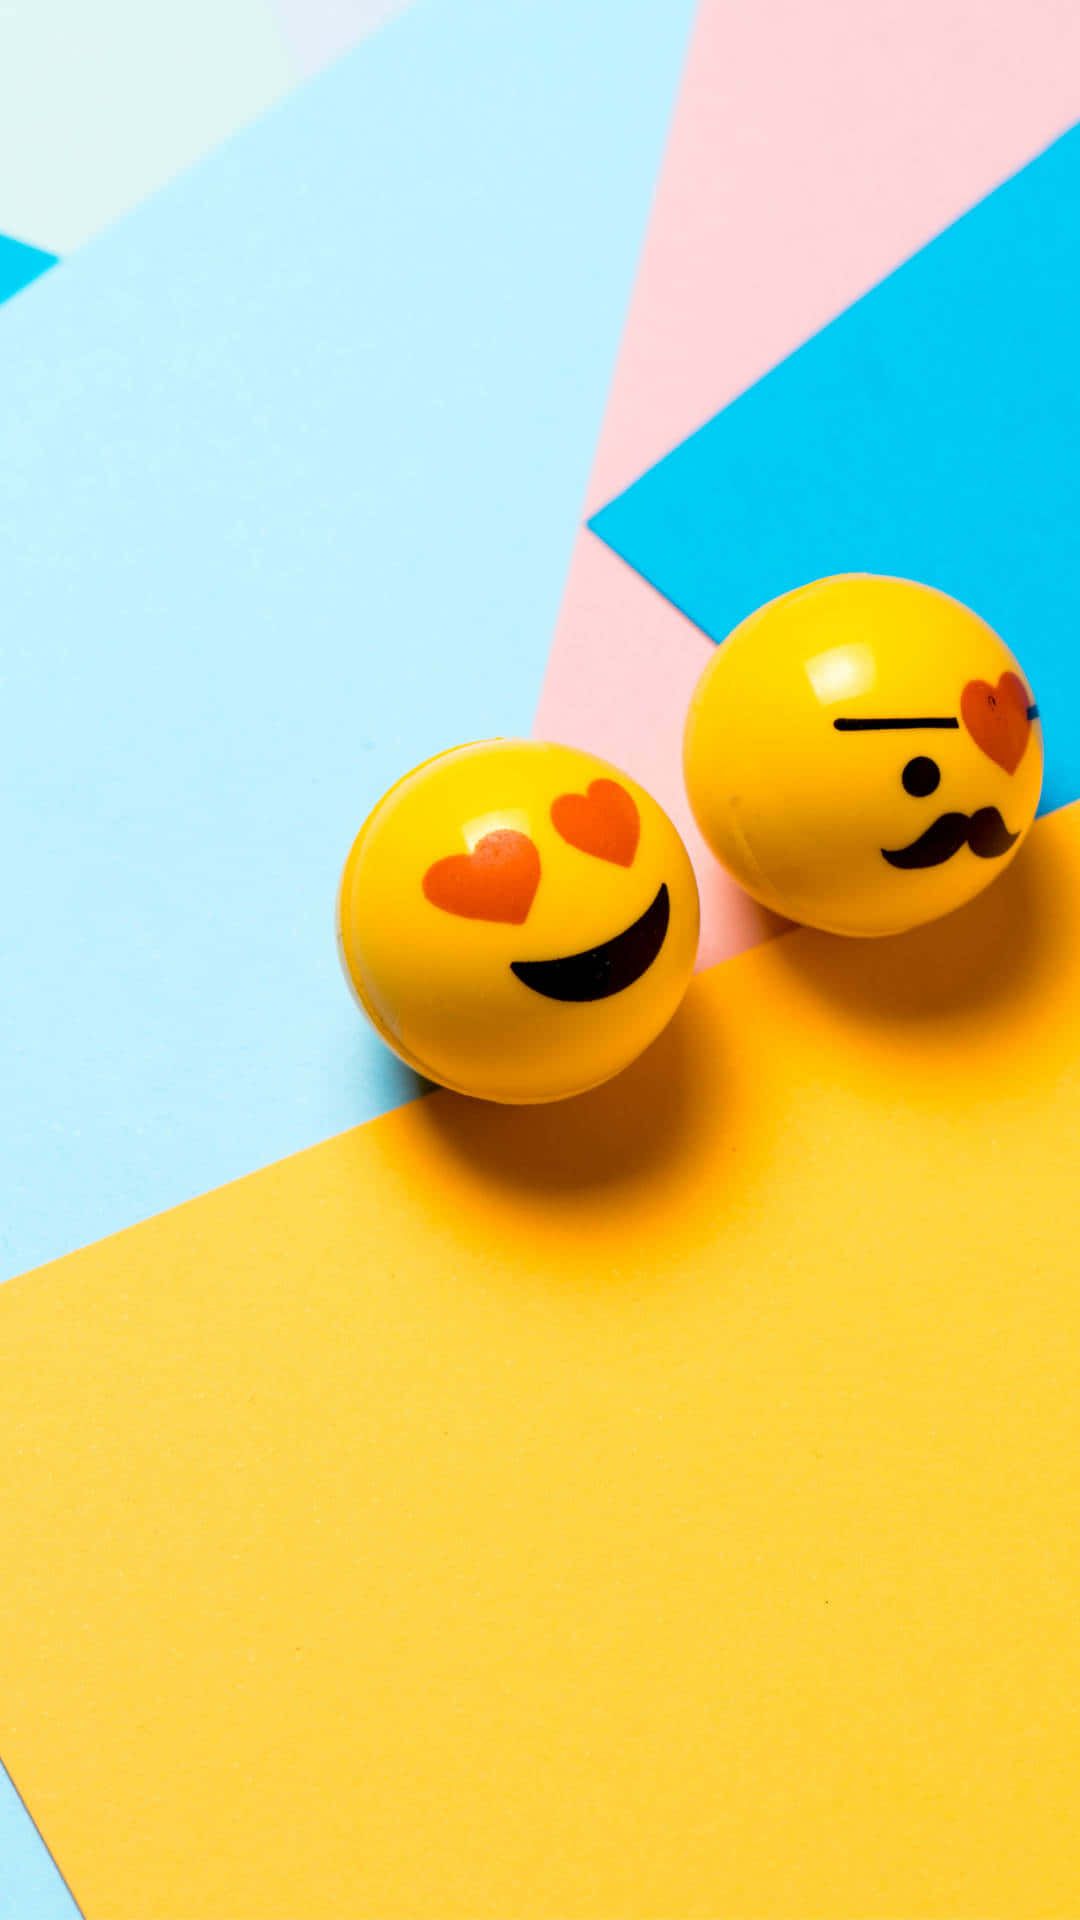 Two smileys on a colorful background - Emoji